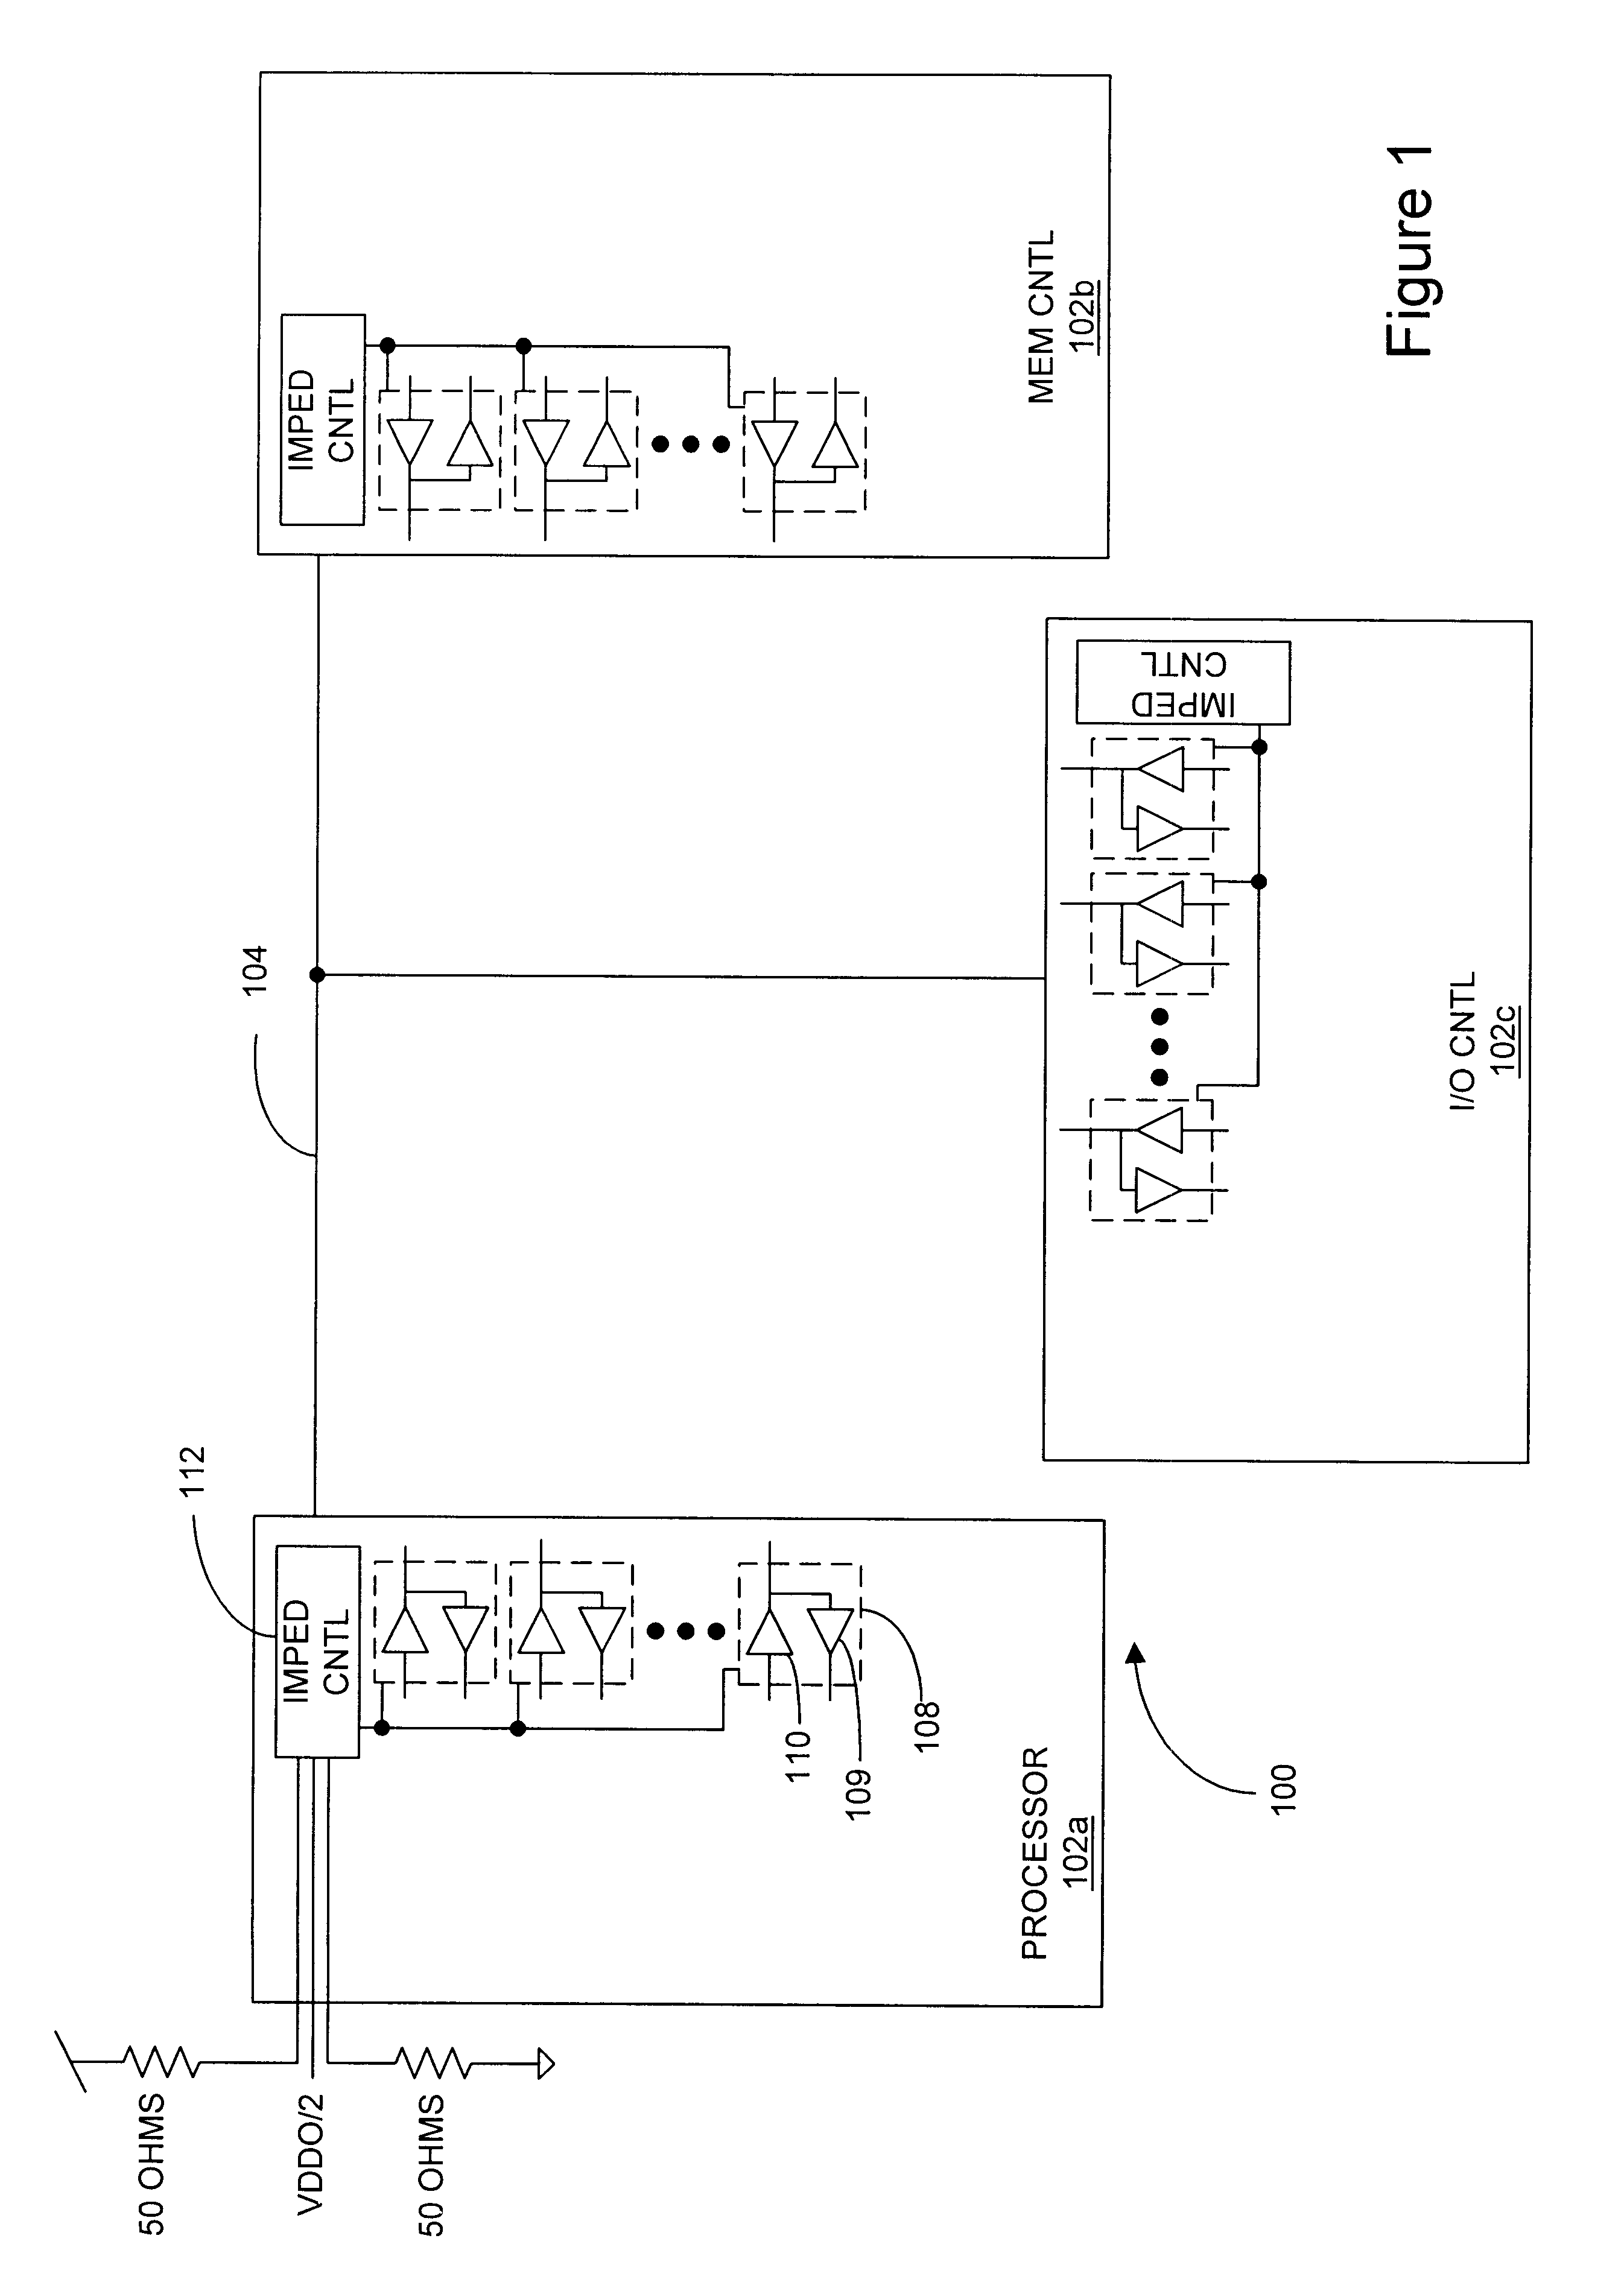 Dynamic termination logic driver with improved impedance control